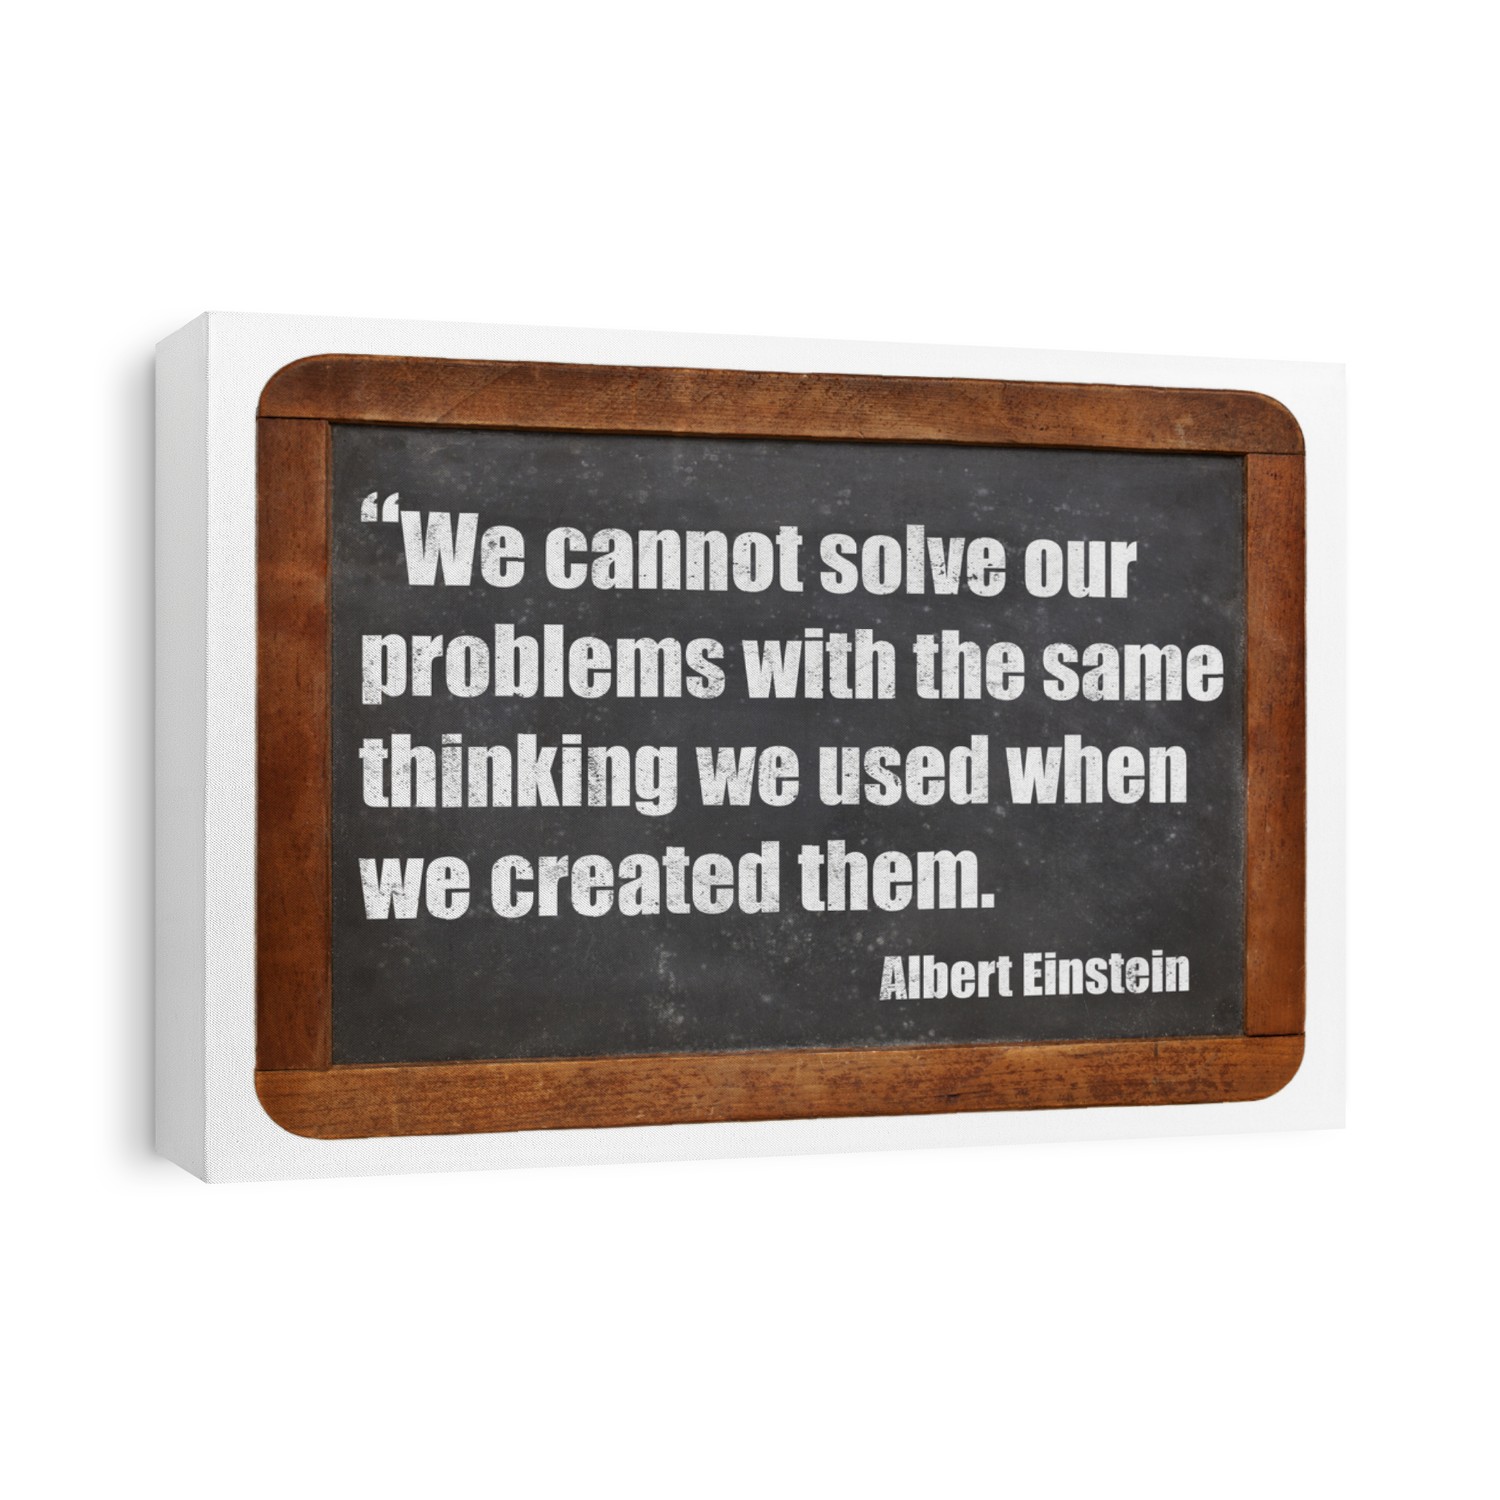 We cannot solve our problems with the same thinking we used when we created them  - a quote from Albert Einstein - white chalk text  on a vintage slate blackboard